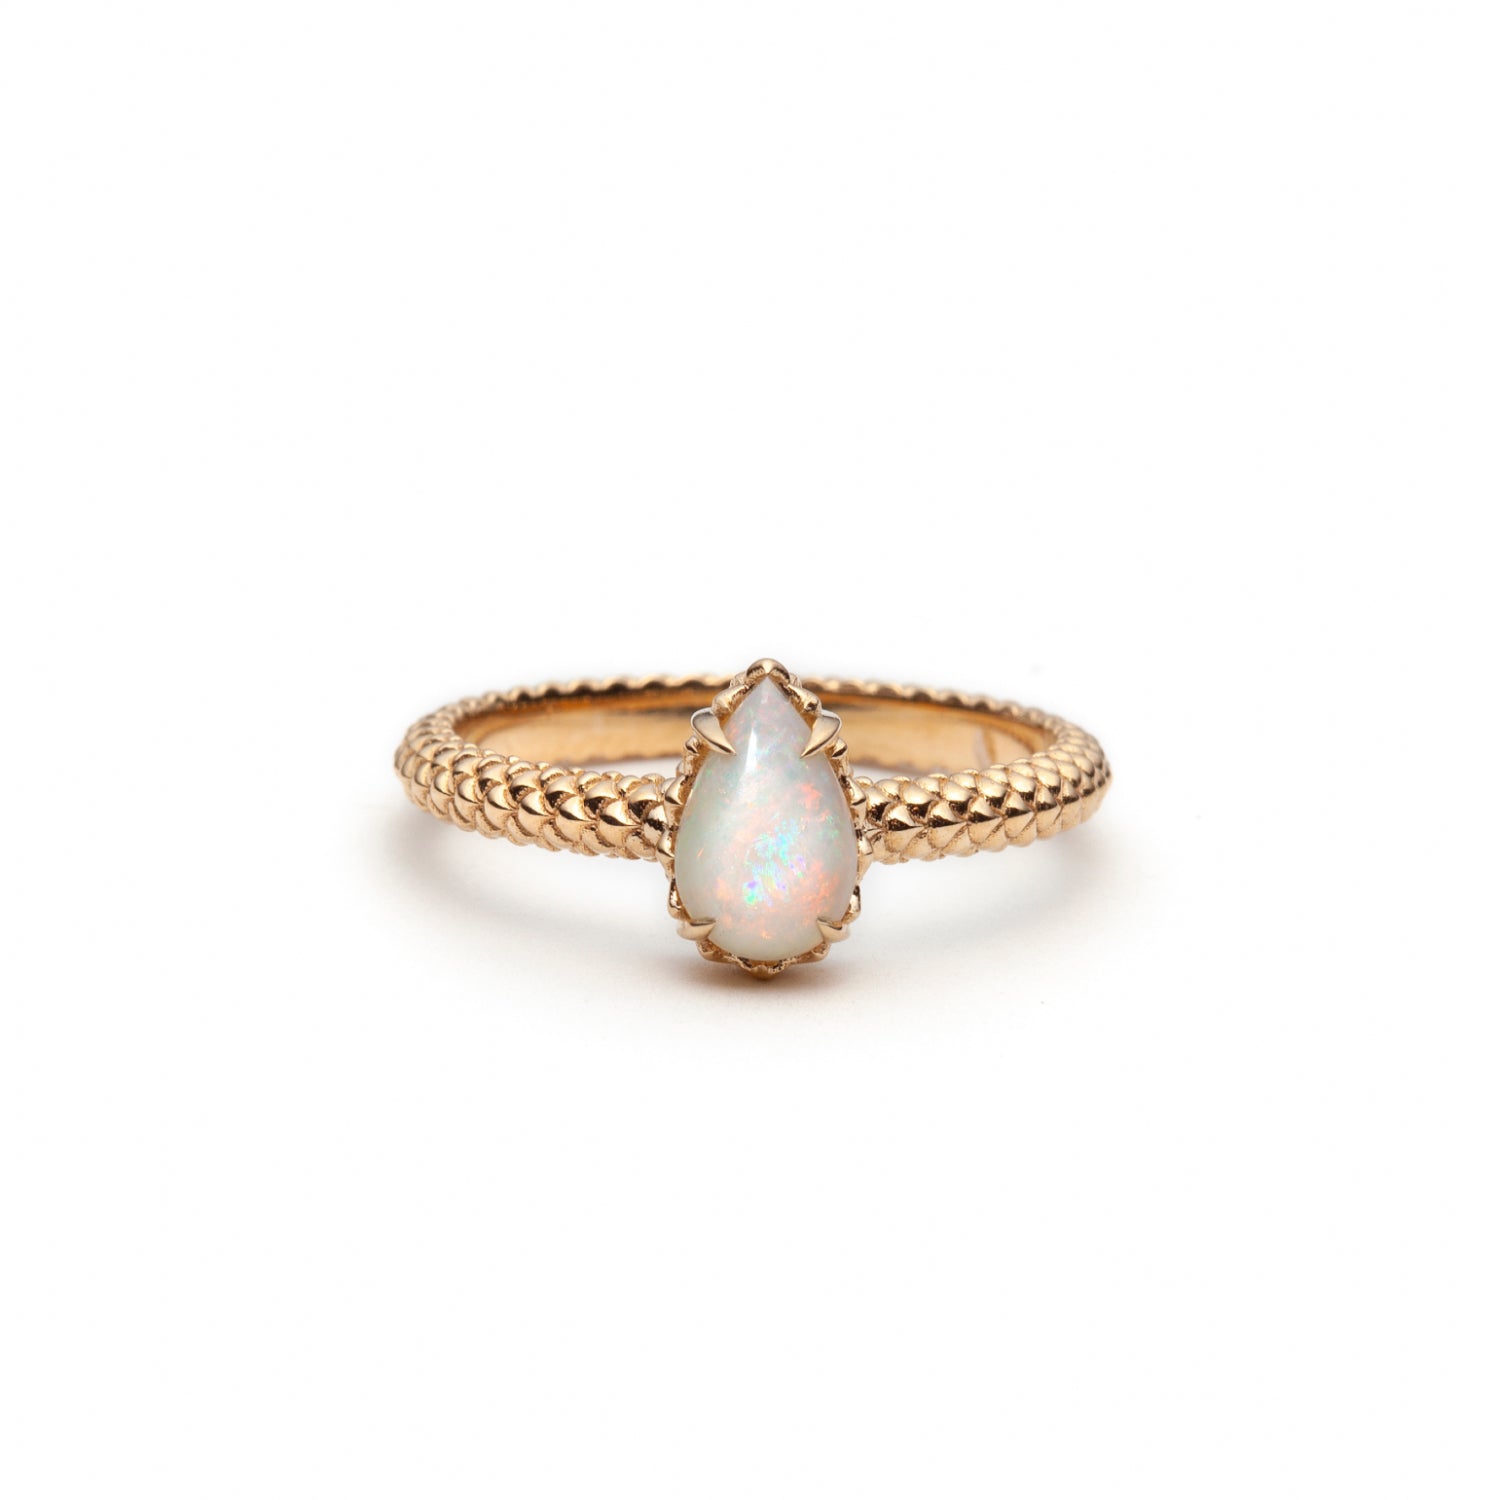 Mermaid Pear-Shaped Opal Ring in Yellow Gold